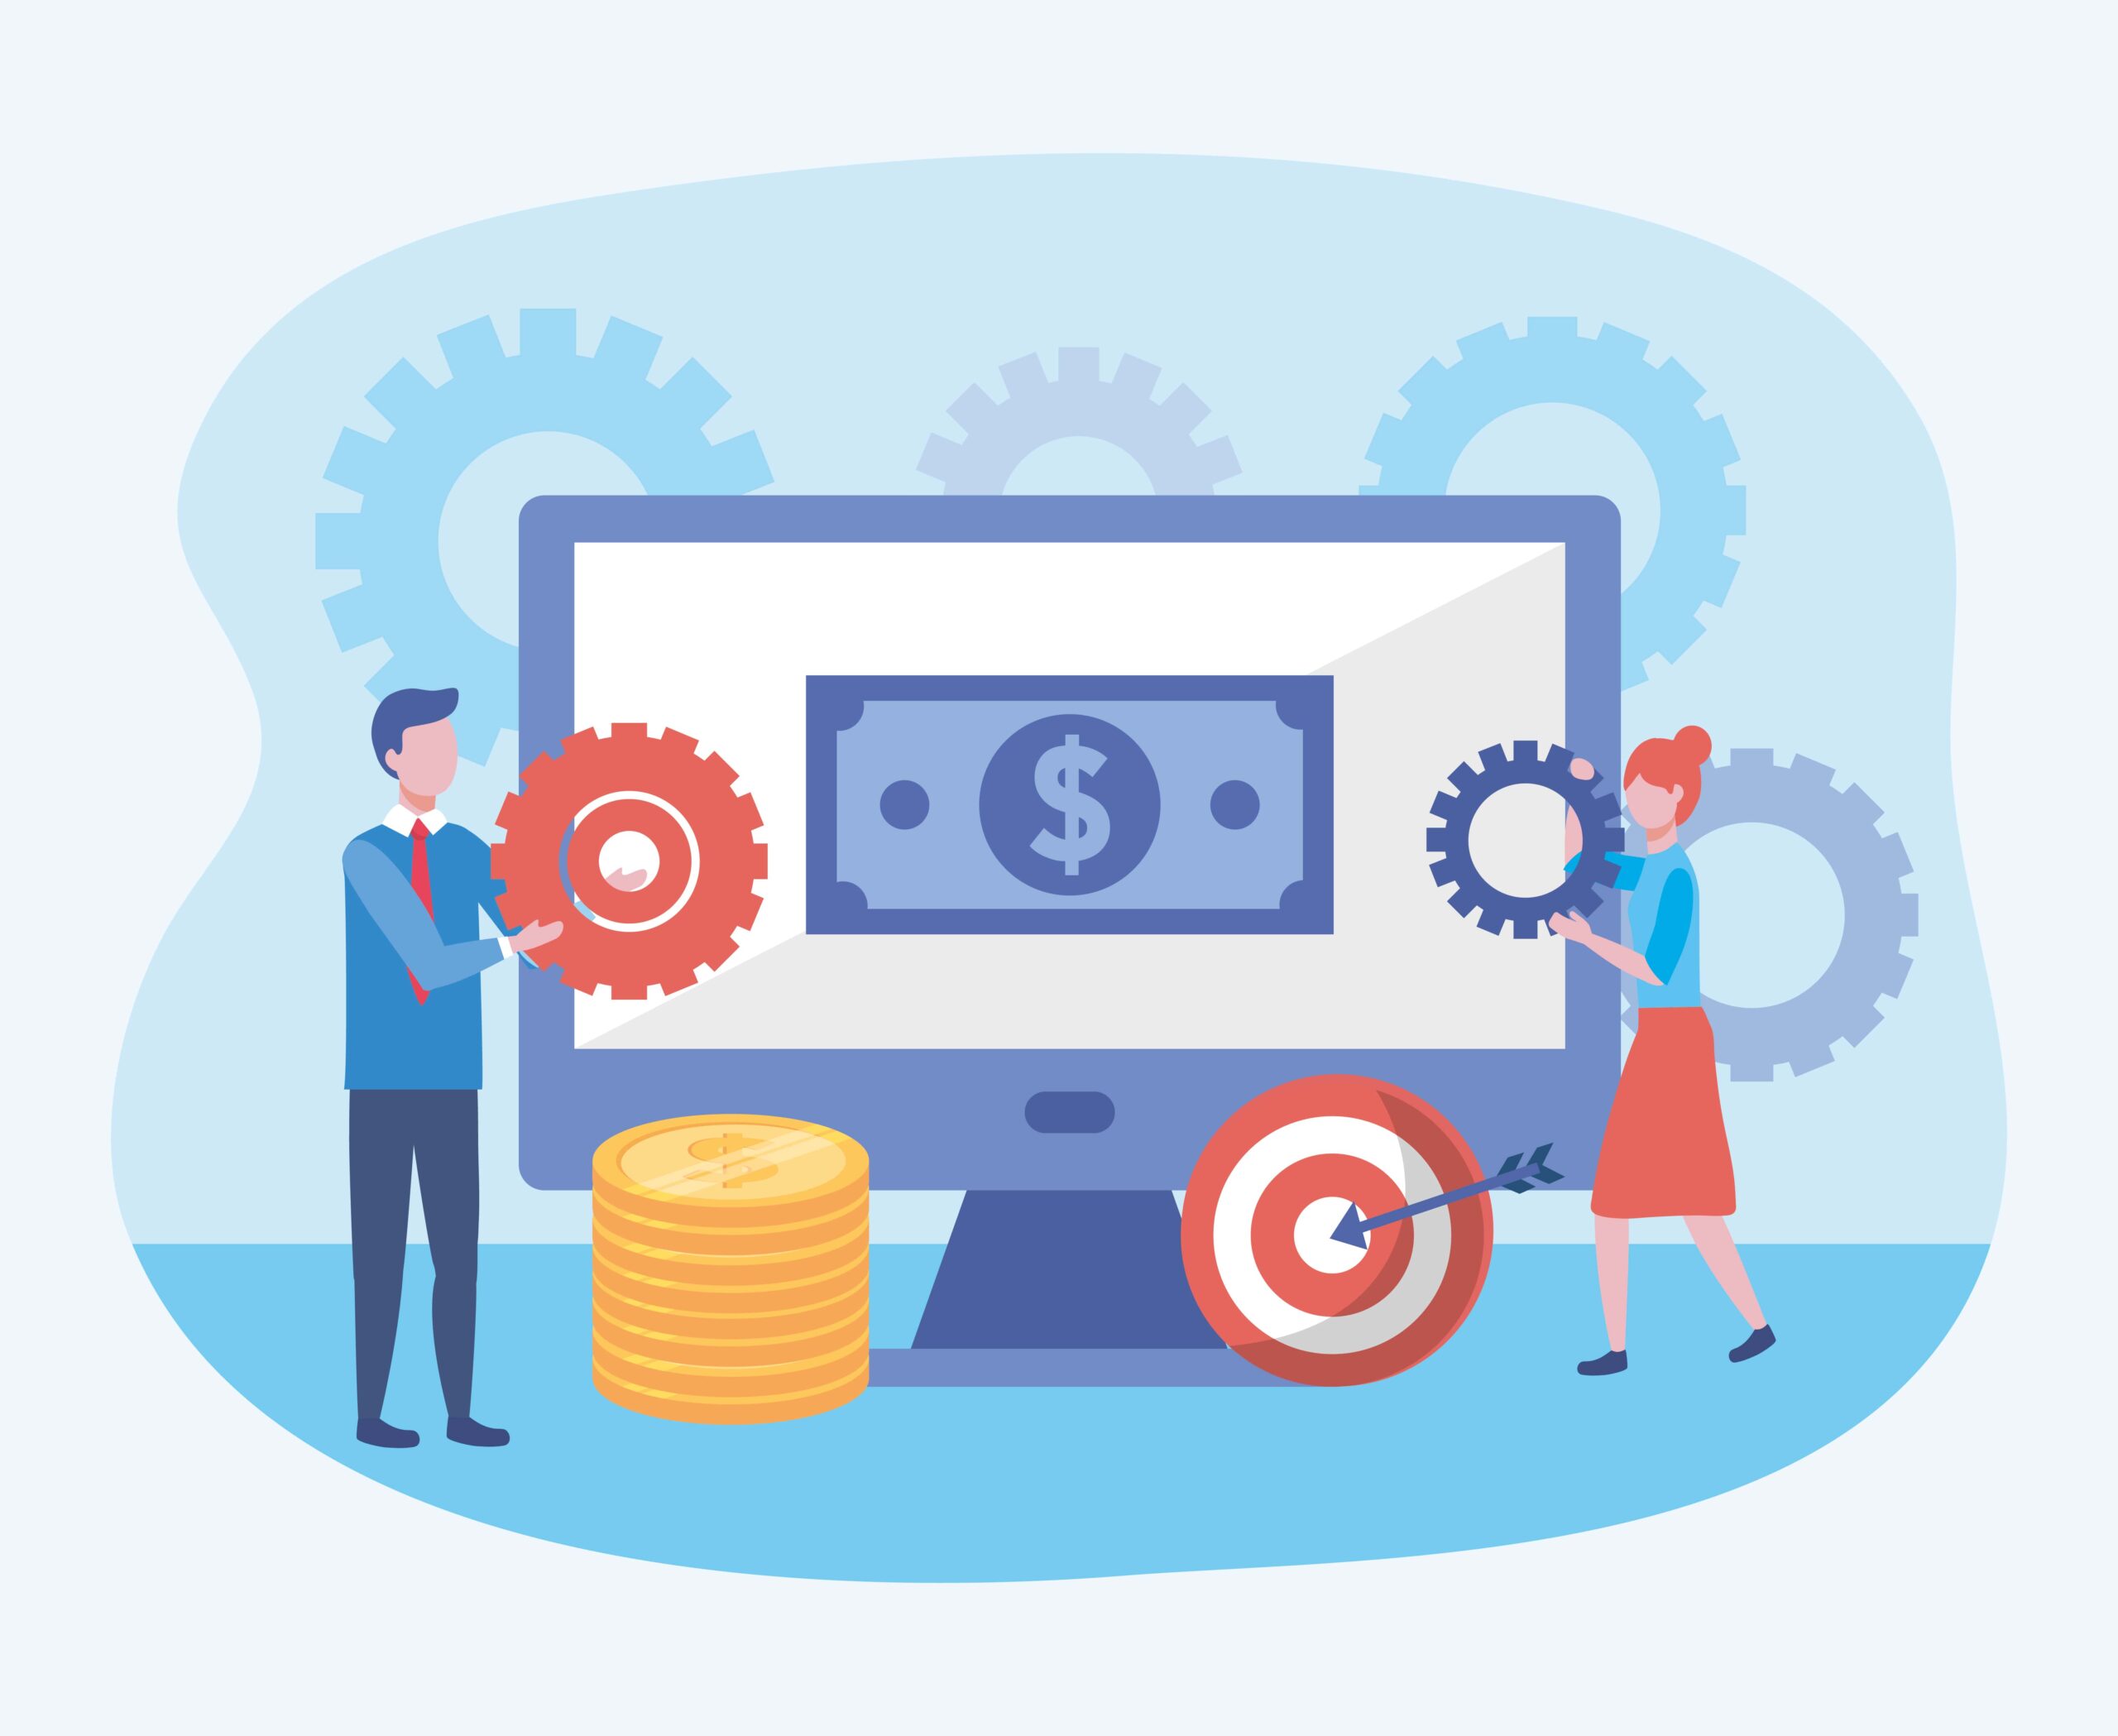 working site illustration with cogs and money